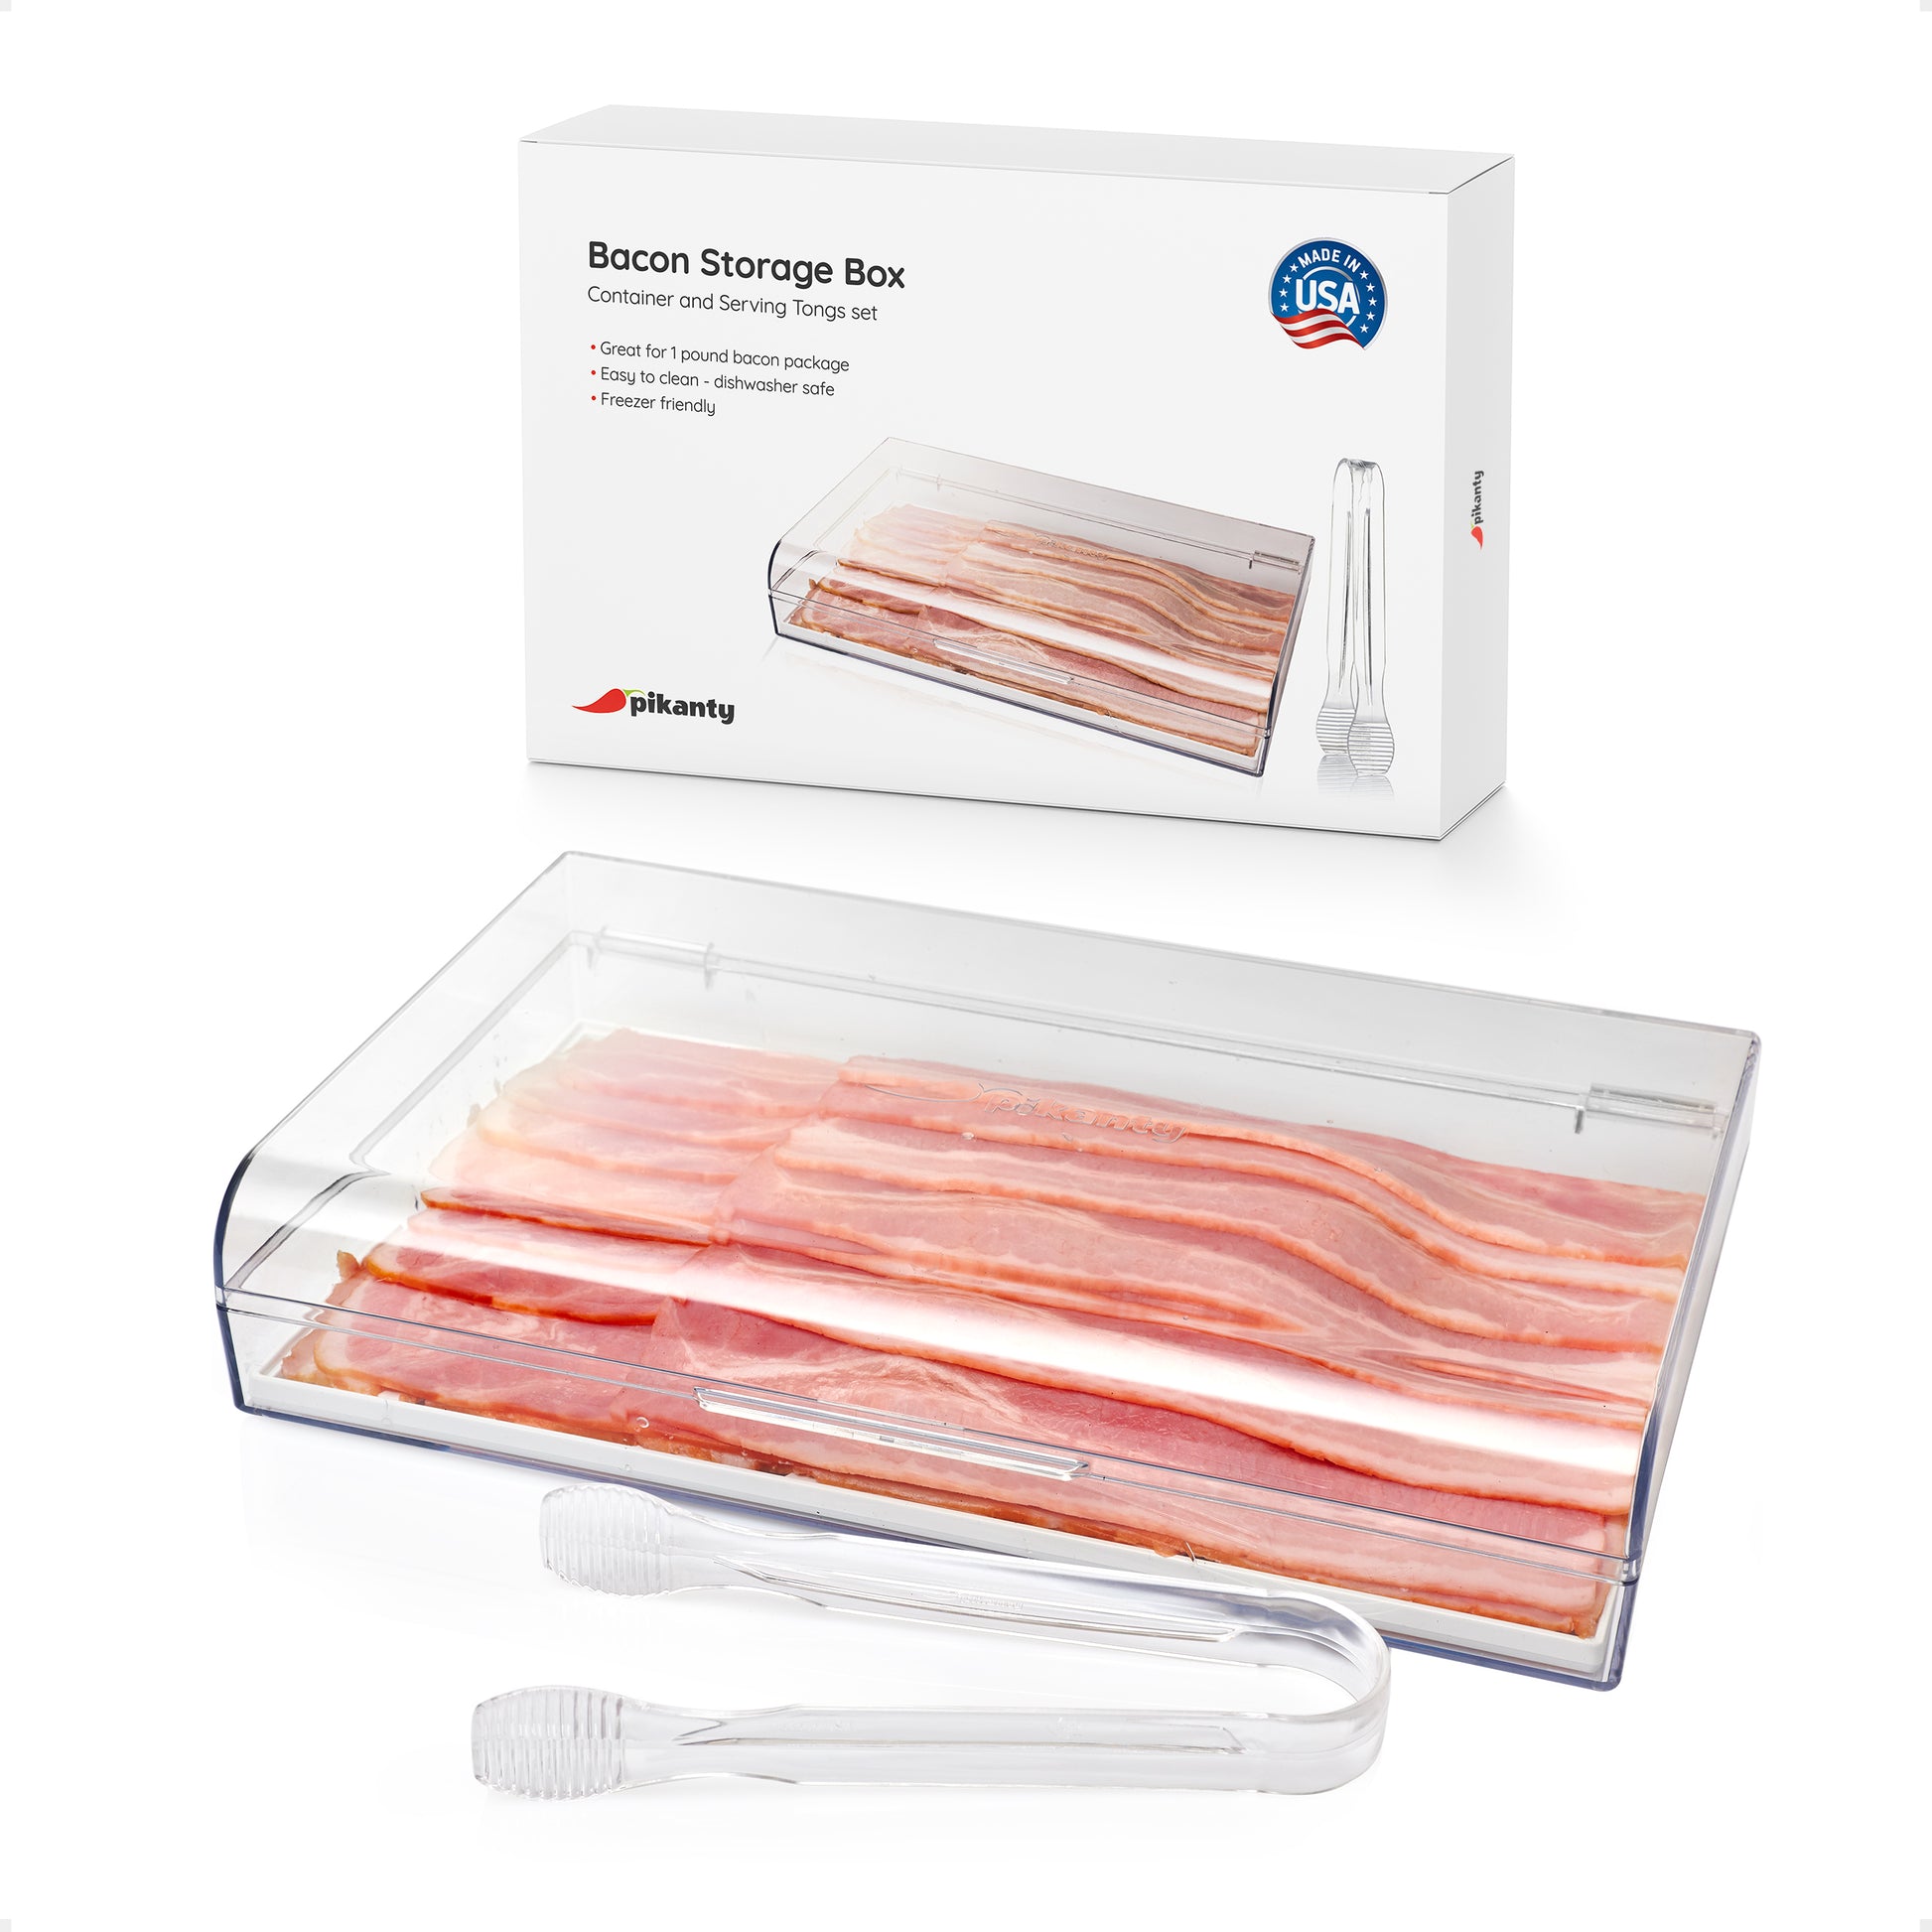  yarlung 6 Pack Bacon Keeper for Refrigerator, Deli